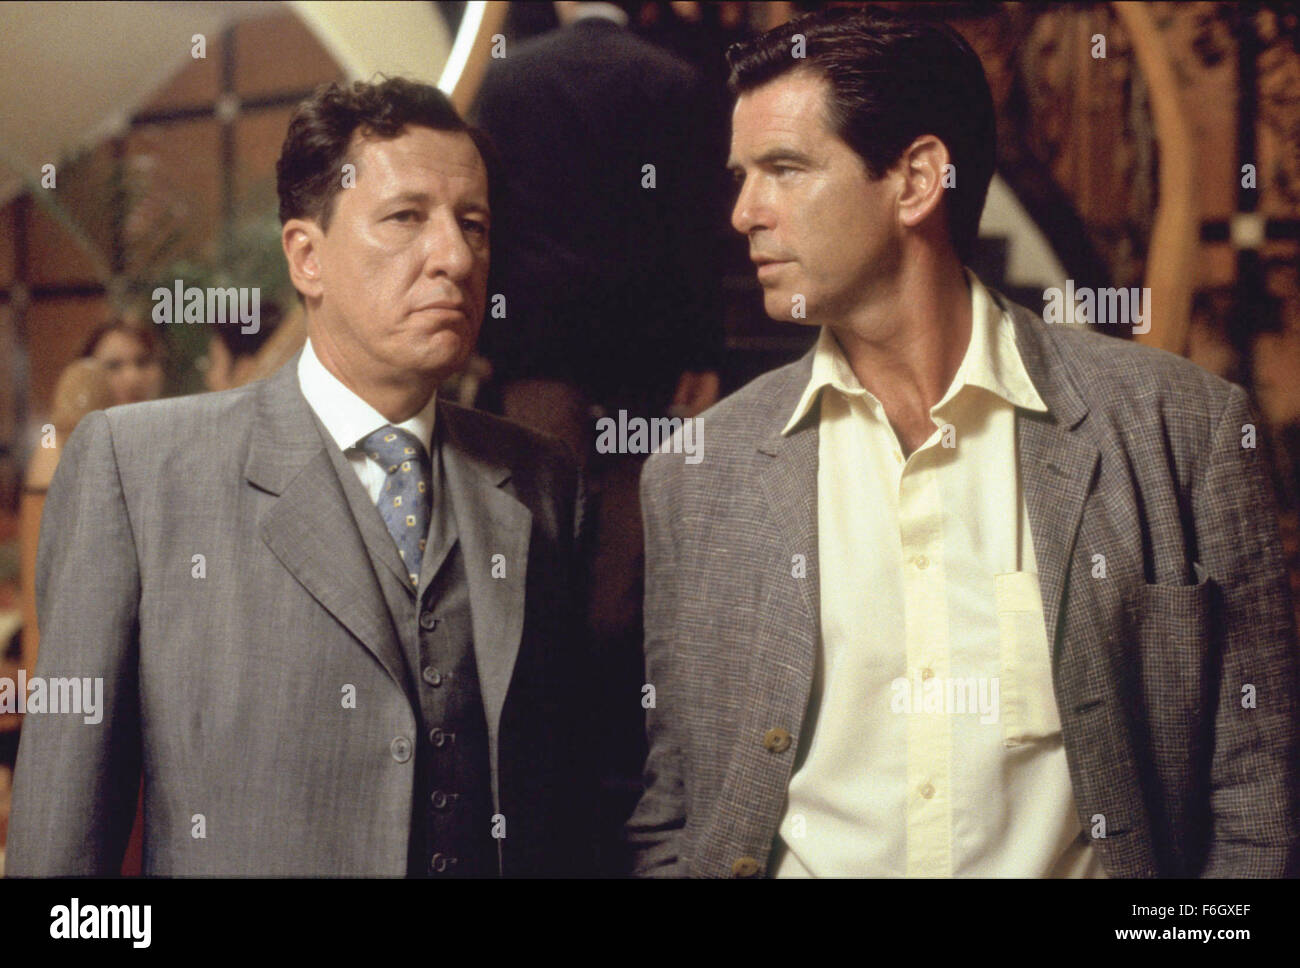 May 06, 2001; Hollywood, CA, USA; Images from John Boorman's 'Tailor of Panama,' starring GEOFFREY RUSH as Harold 'Harry' Harold Pendel , PIERCE BROSNAN as Andrew 'Andy' Osnard. Stock Photo